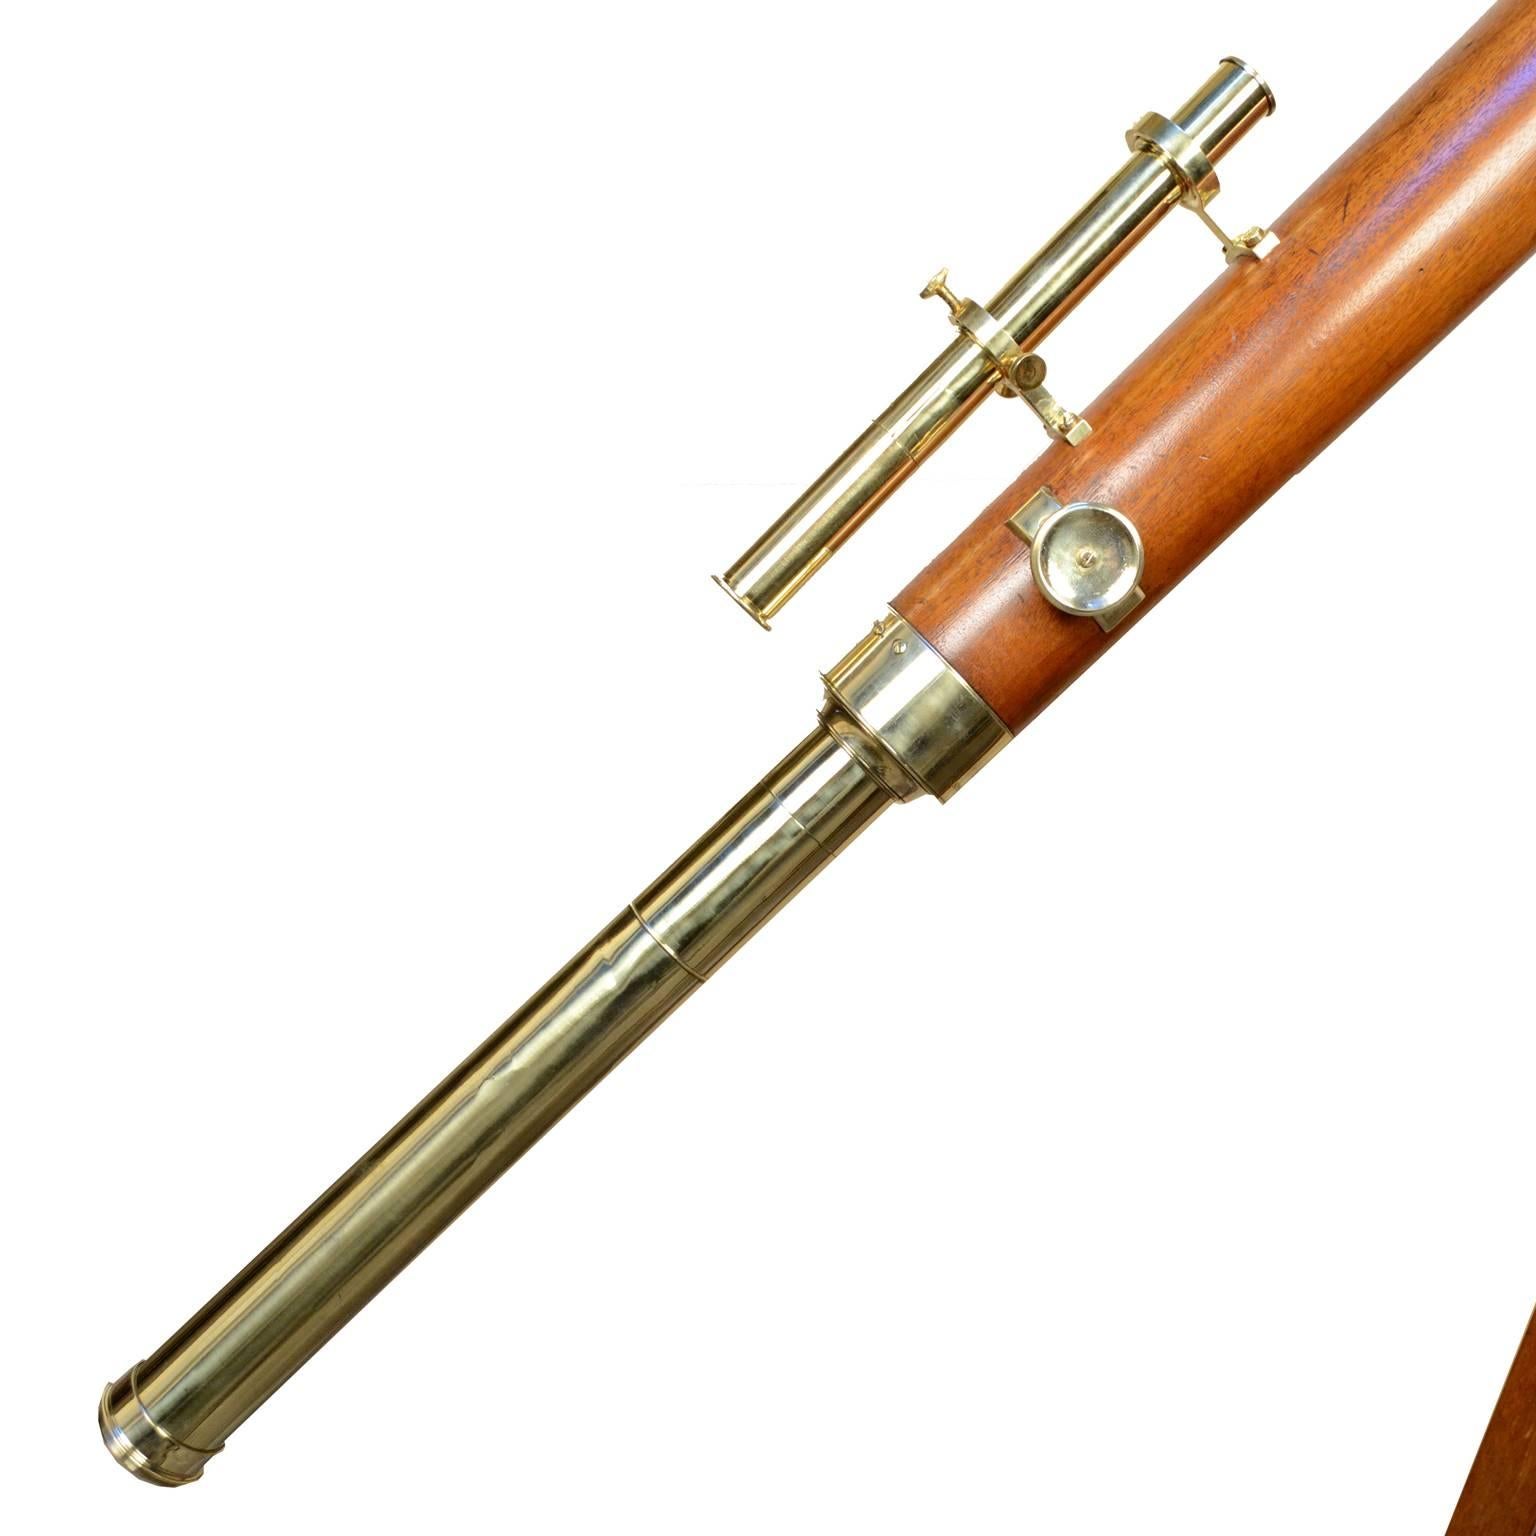 British Astronomical Telescope Signed W. Gilbert & Sons London, Early 1800